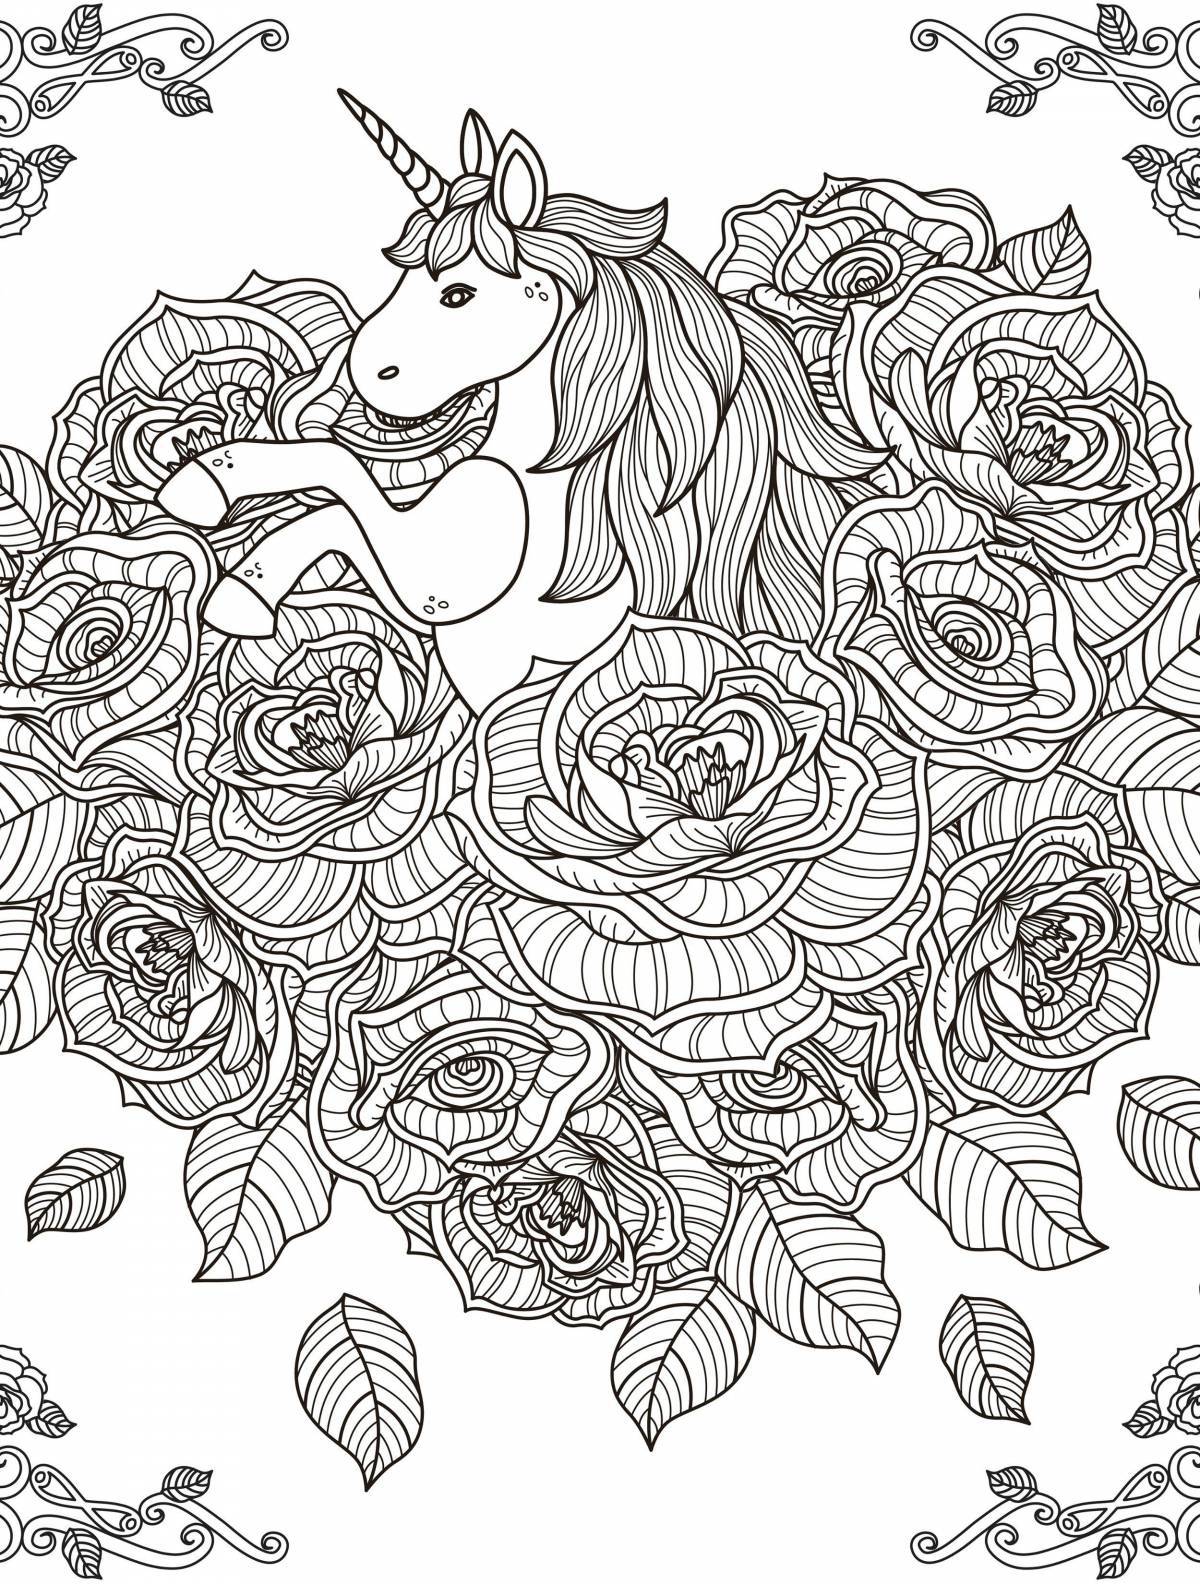 Radiant coloring page painted